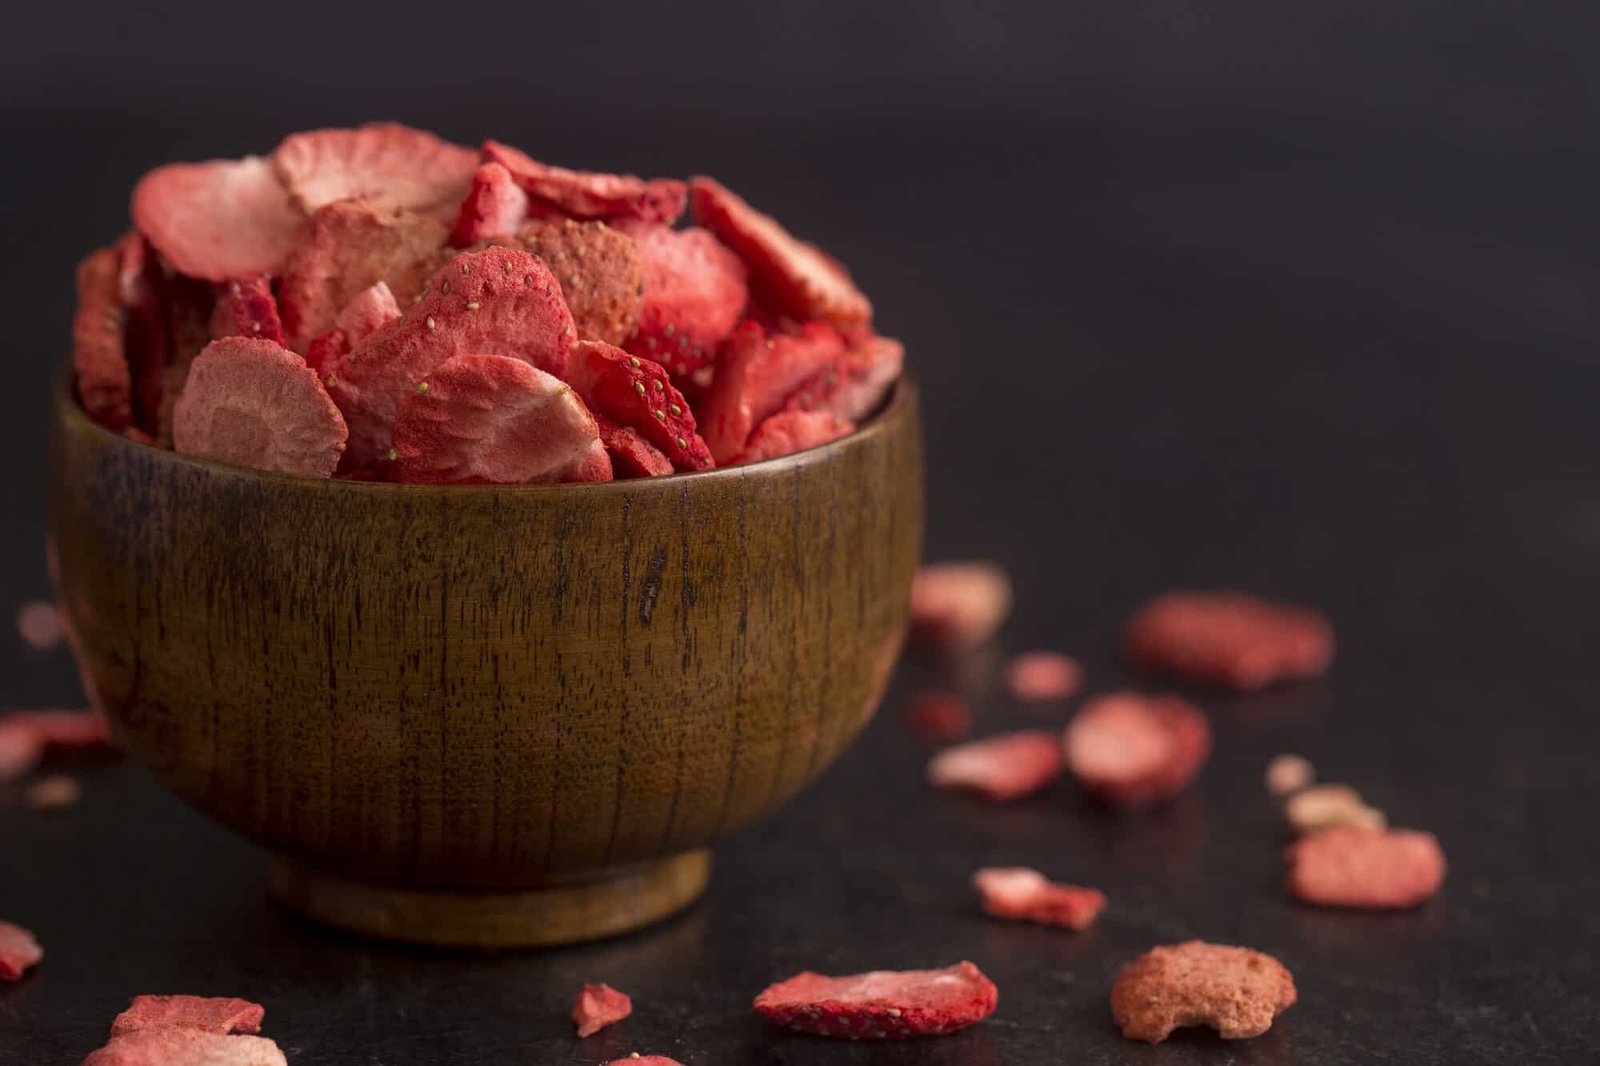 dried strawberries in small wooden bowl and around the bowl on a black background